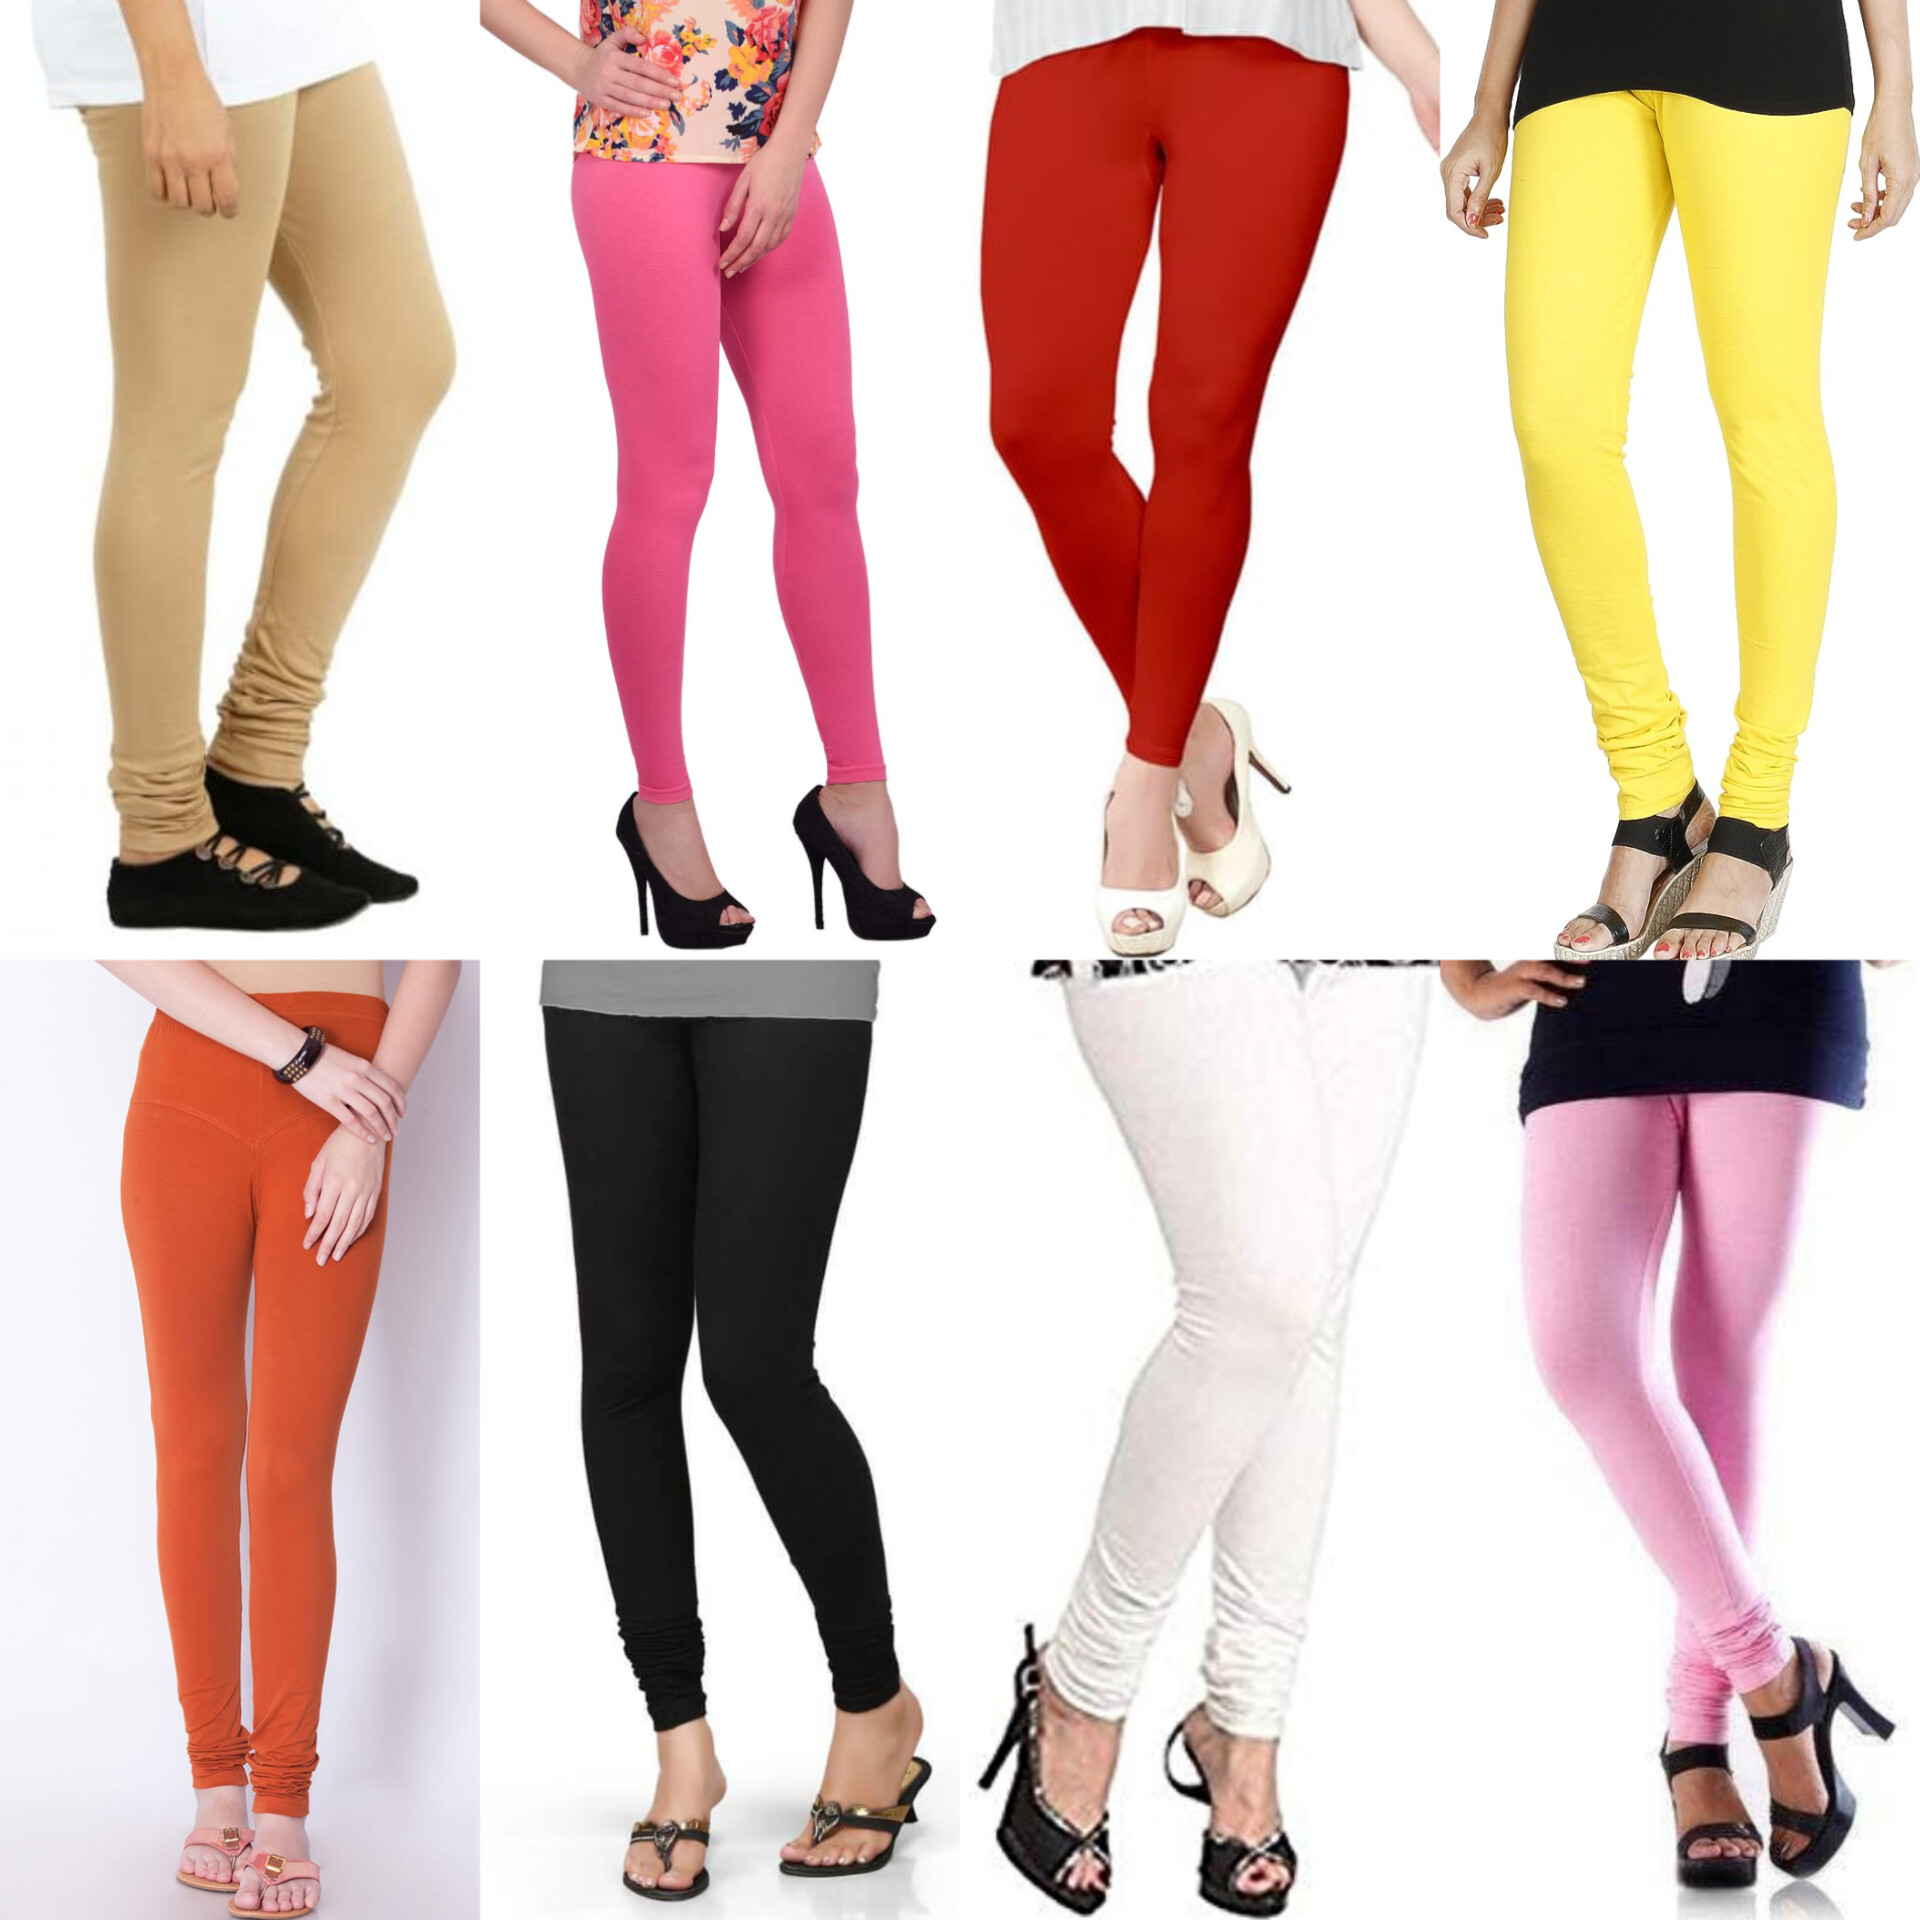 Colorful Tights and Leggings for girls in Vibrant colors